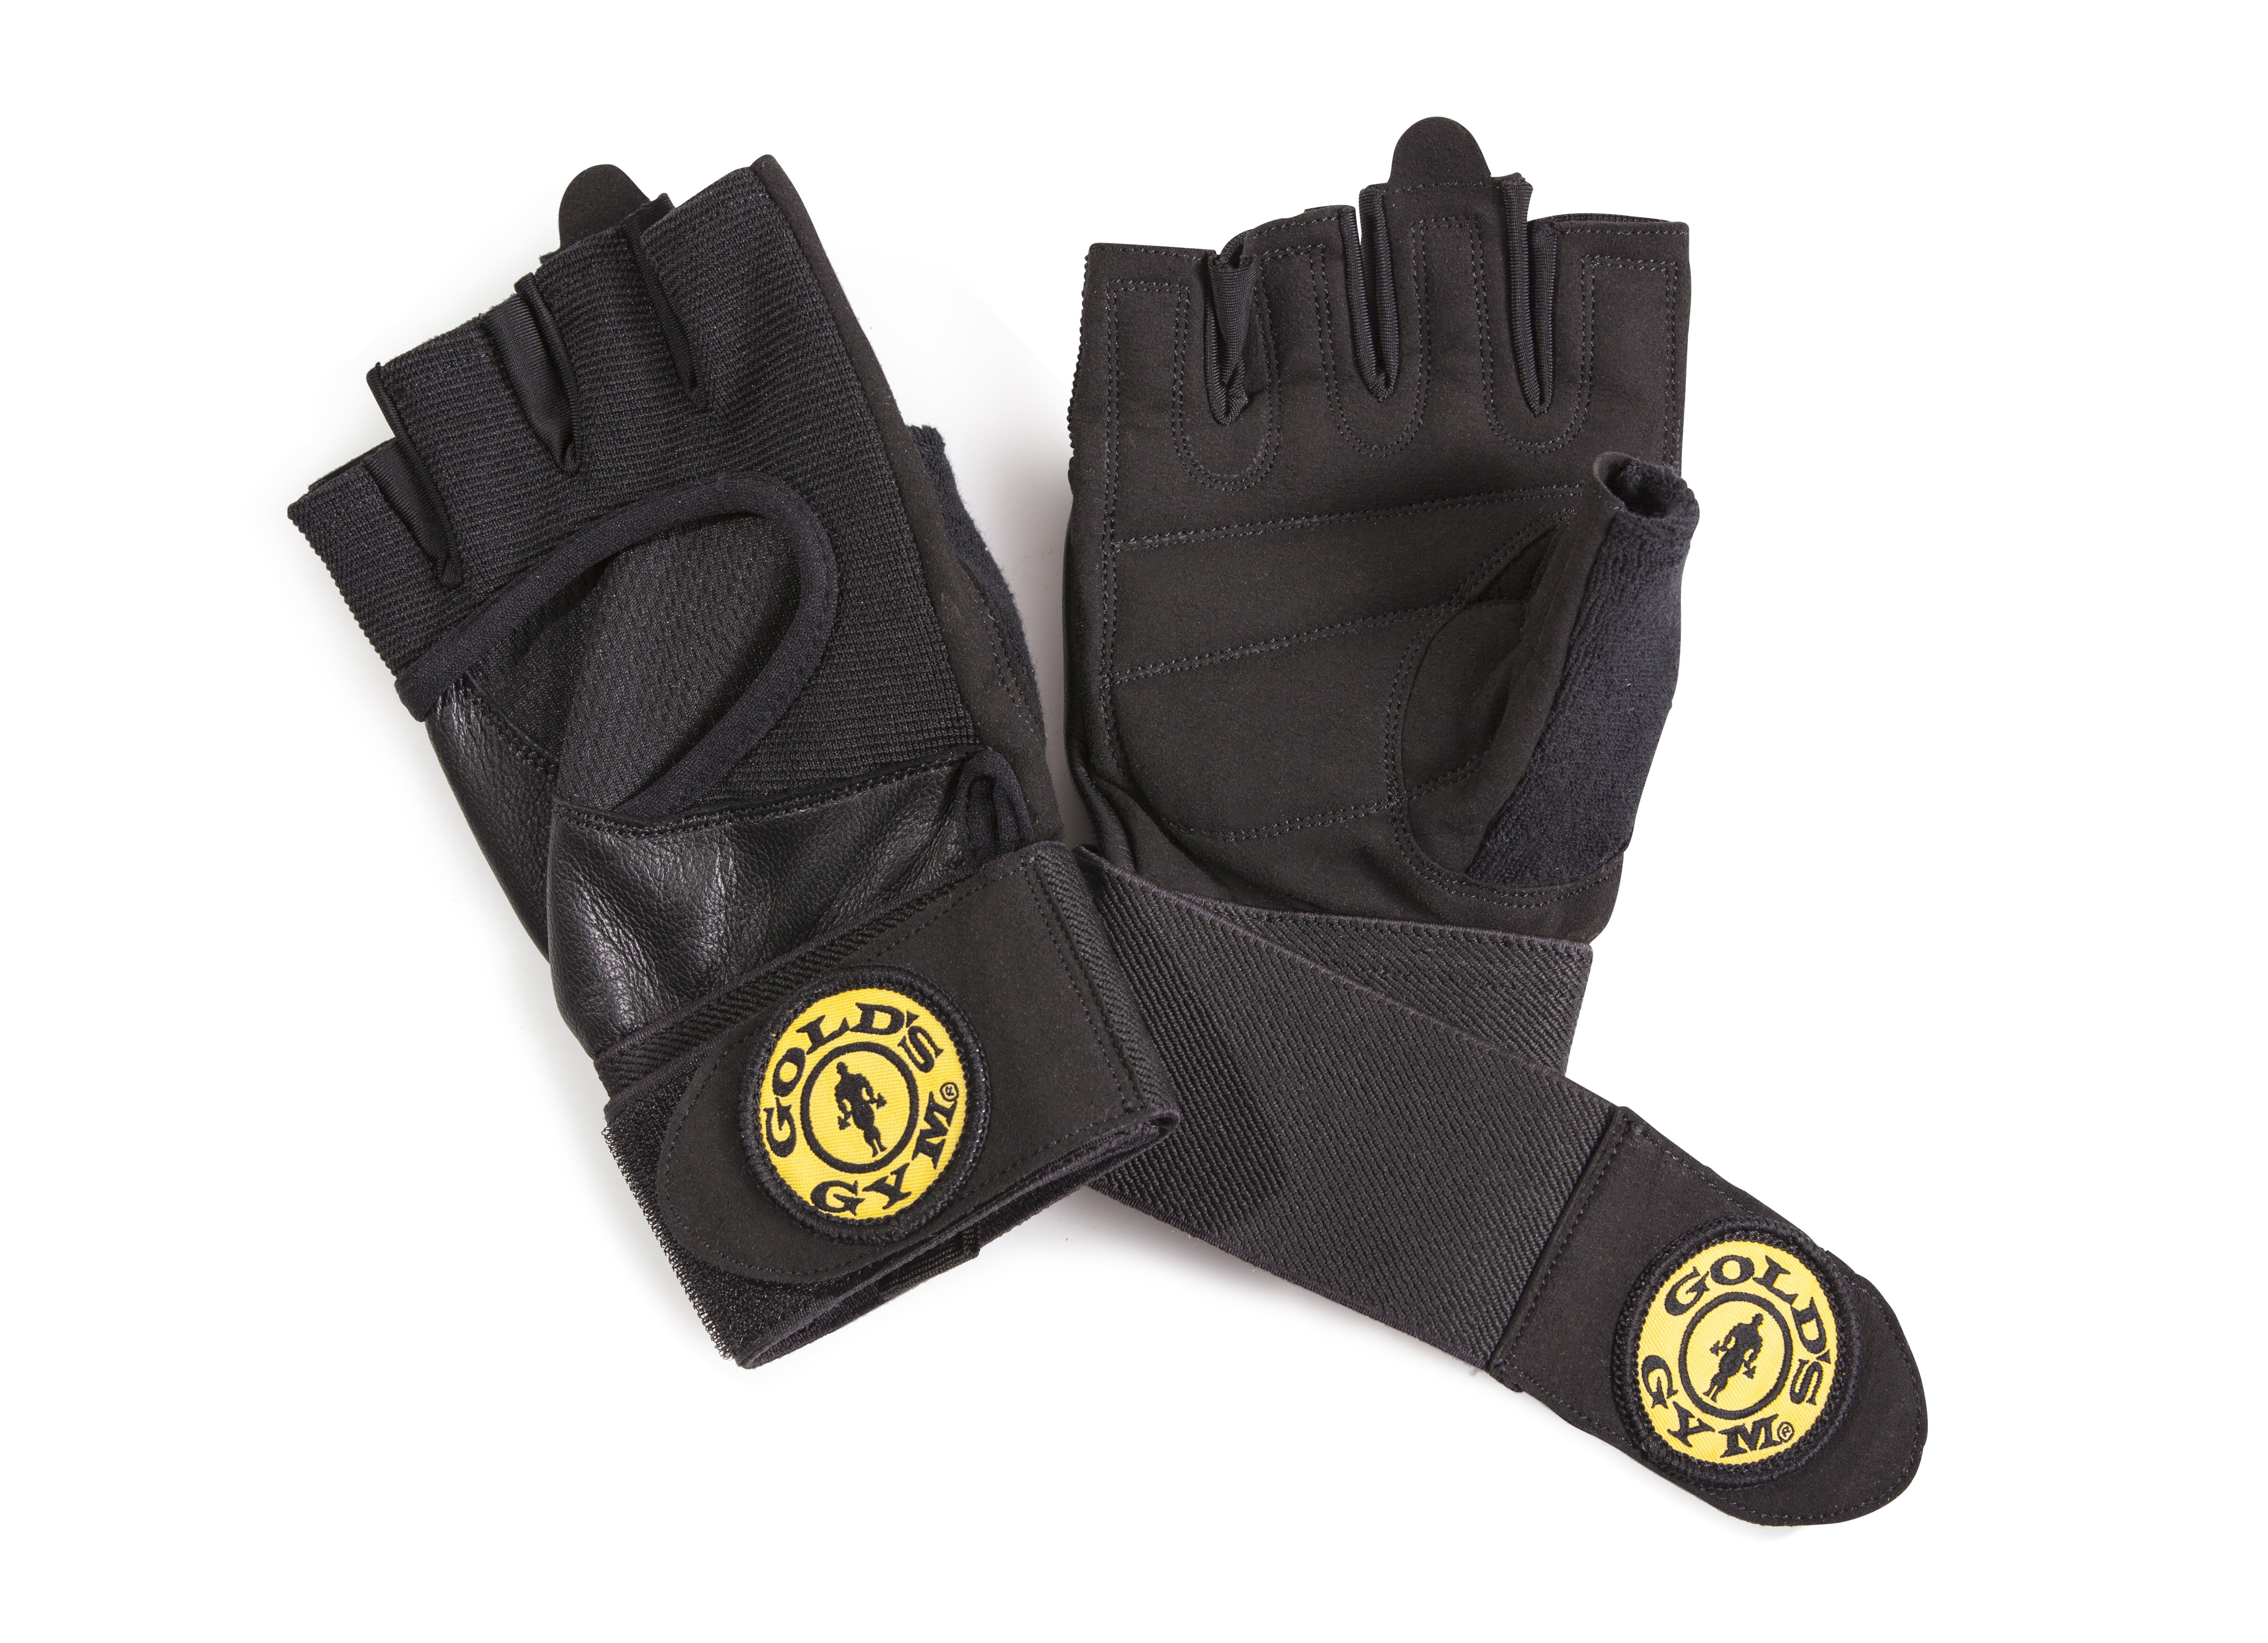 GOLDS Gym Wrist Wrap Weight Lifting Gloves 